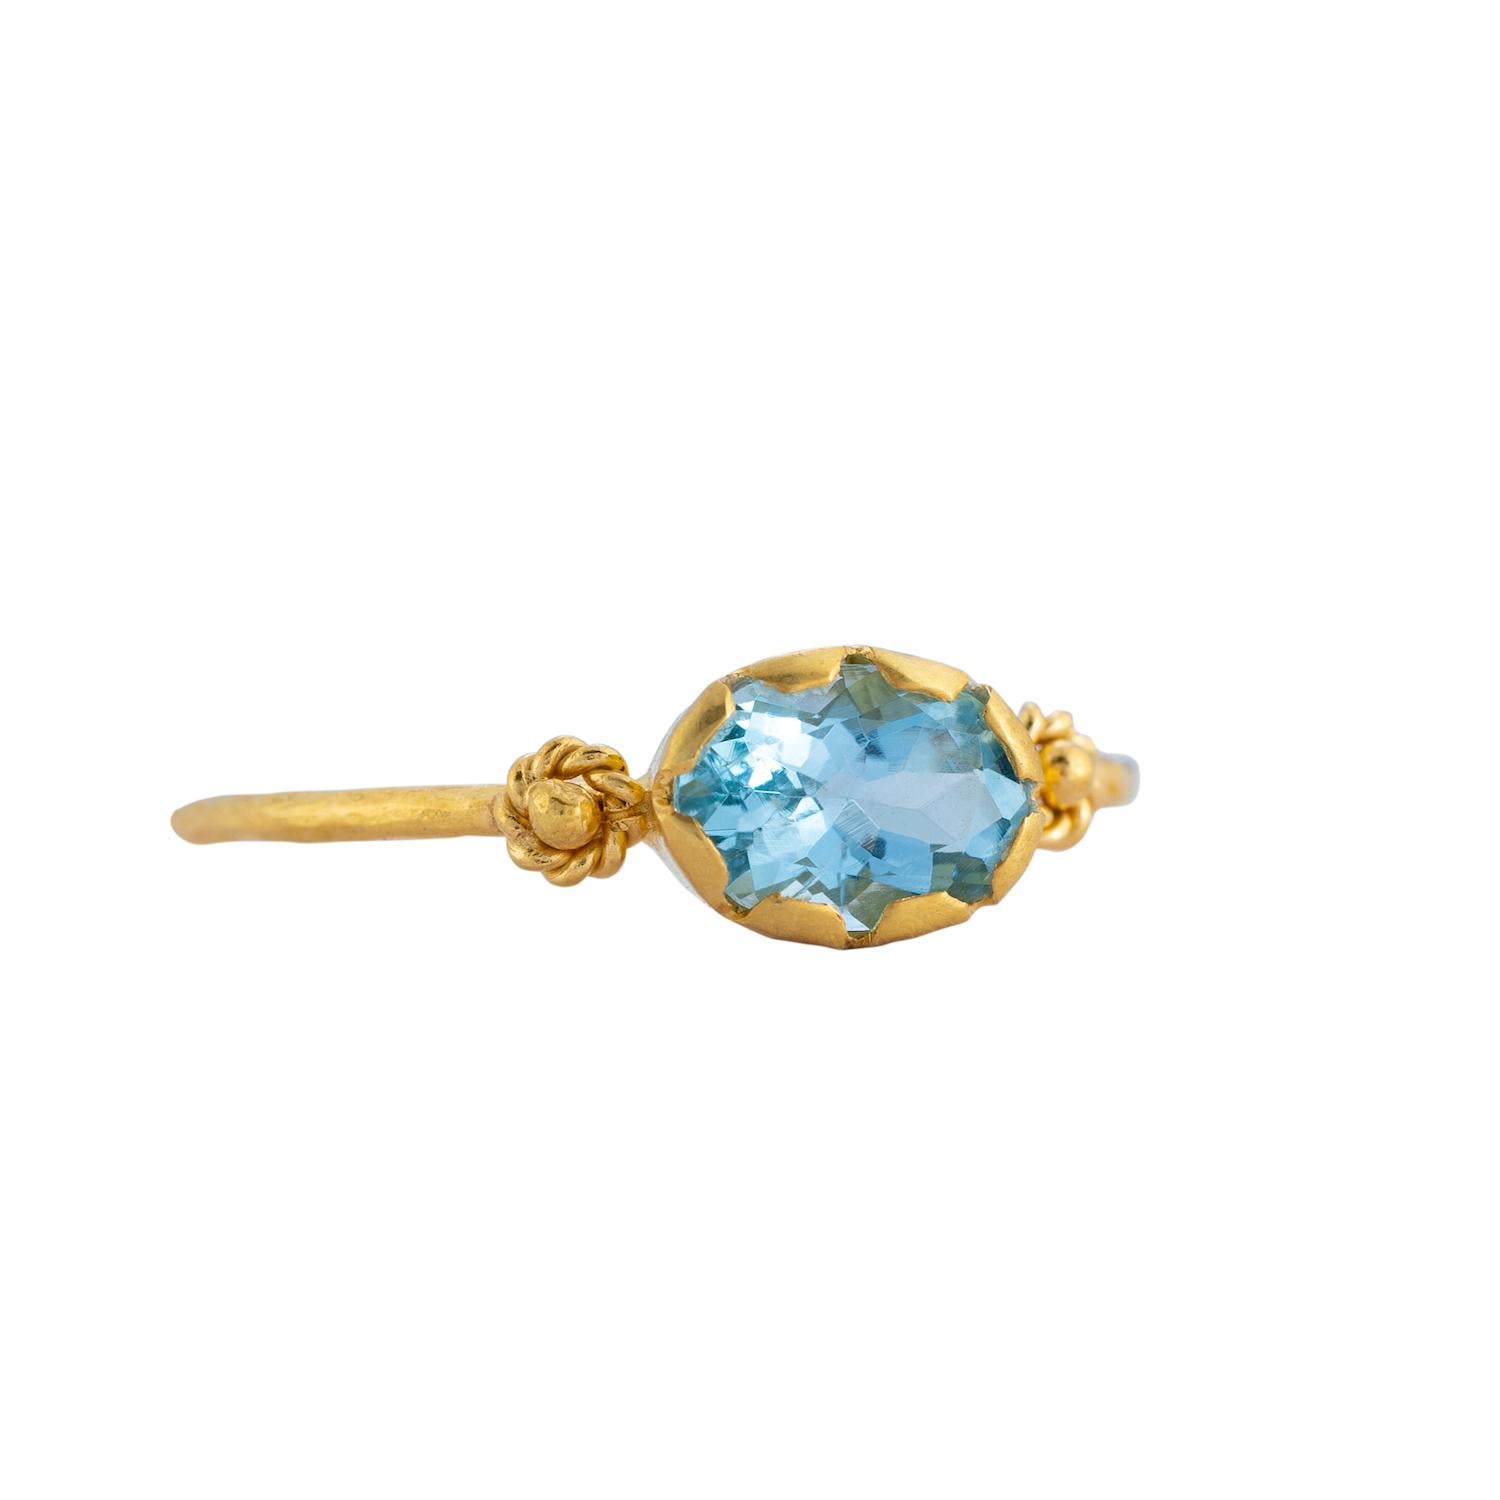 This lovely one-of-a-kind 14ct gold aquamarine stacking ring has been handmade in our workshops. It is embedded with an aquamarine which is flanked by embossed work. Wear it on it's own or stacked, whatever your preference.

Ring dimensions -